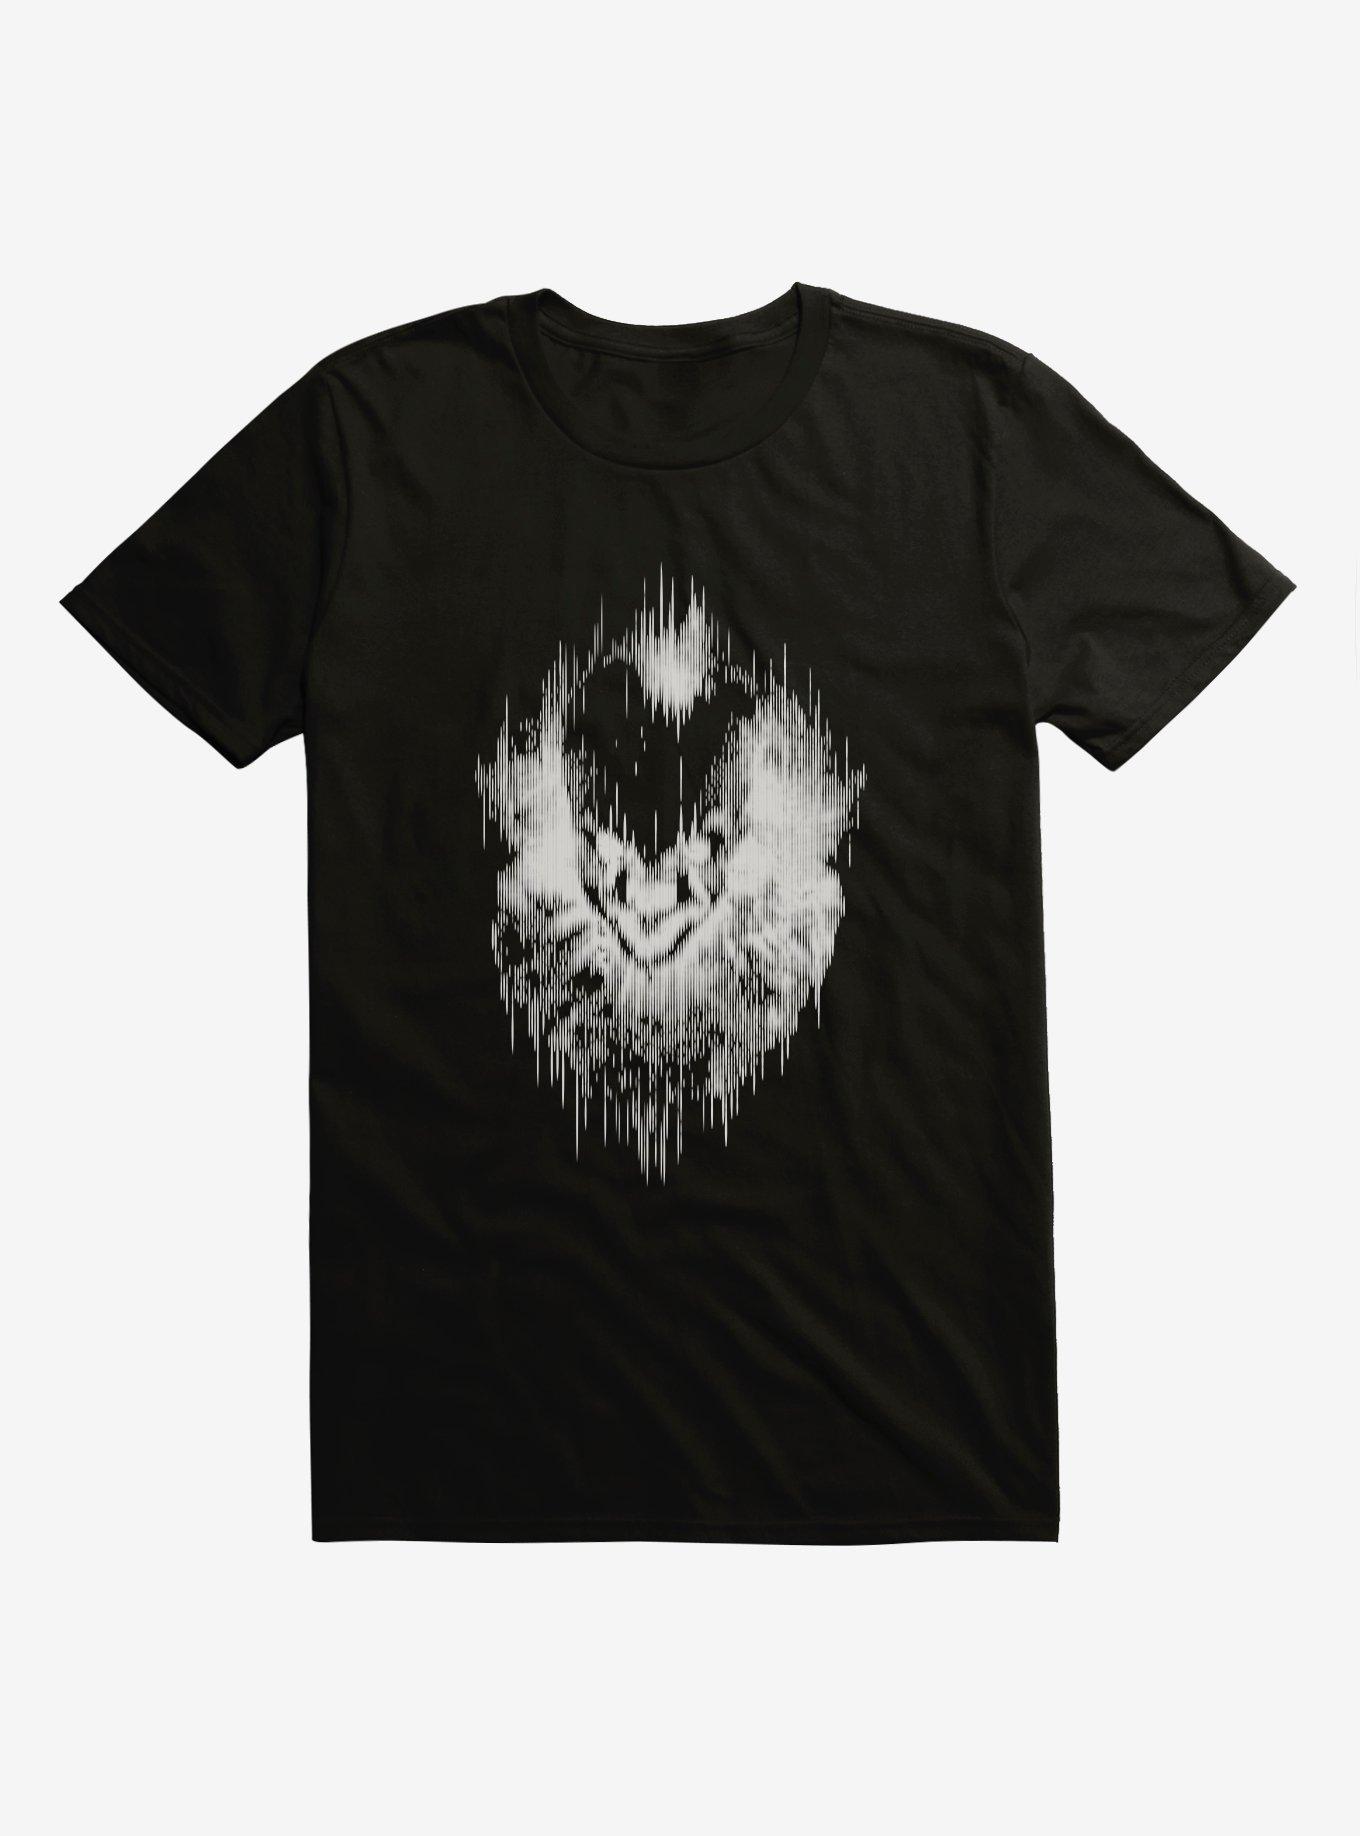 IT Chapter Two Pennywise Static Outline T-Shirt, , hi-res